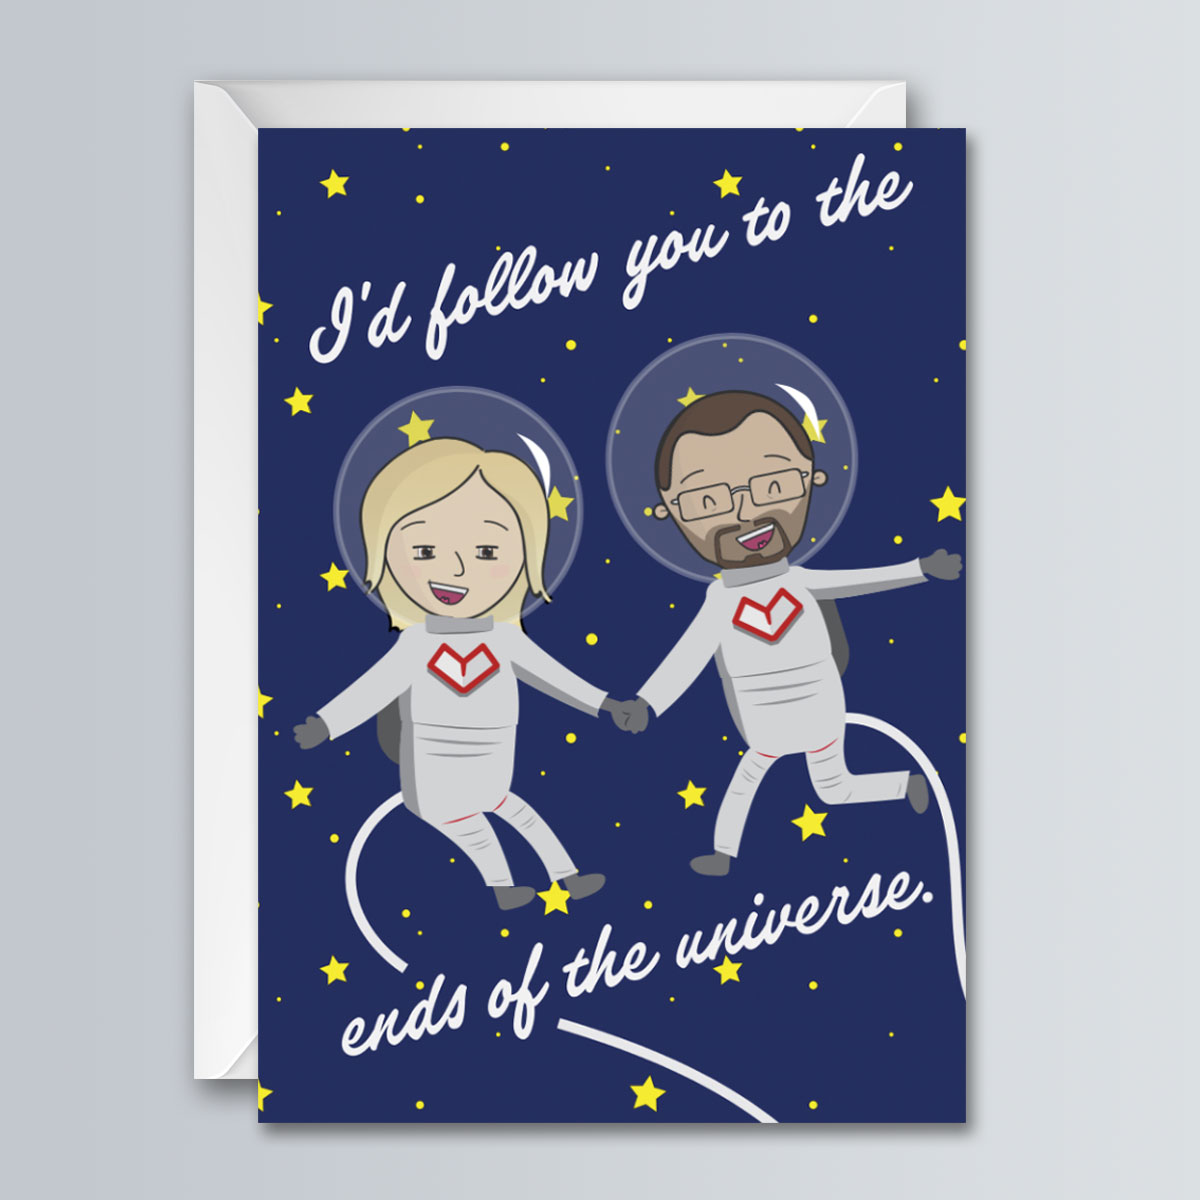 Ends of Universe - Anniversary Greeting Card